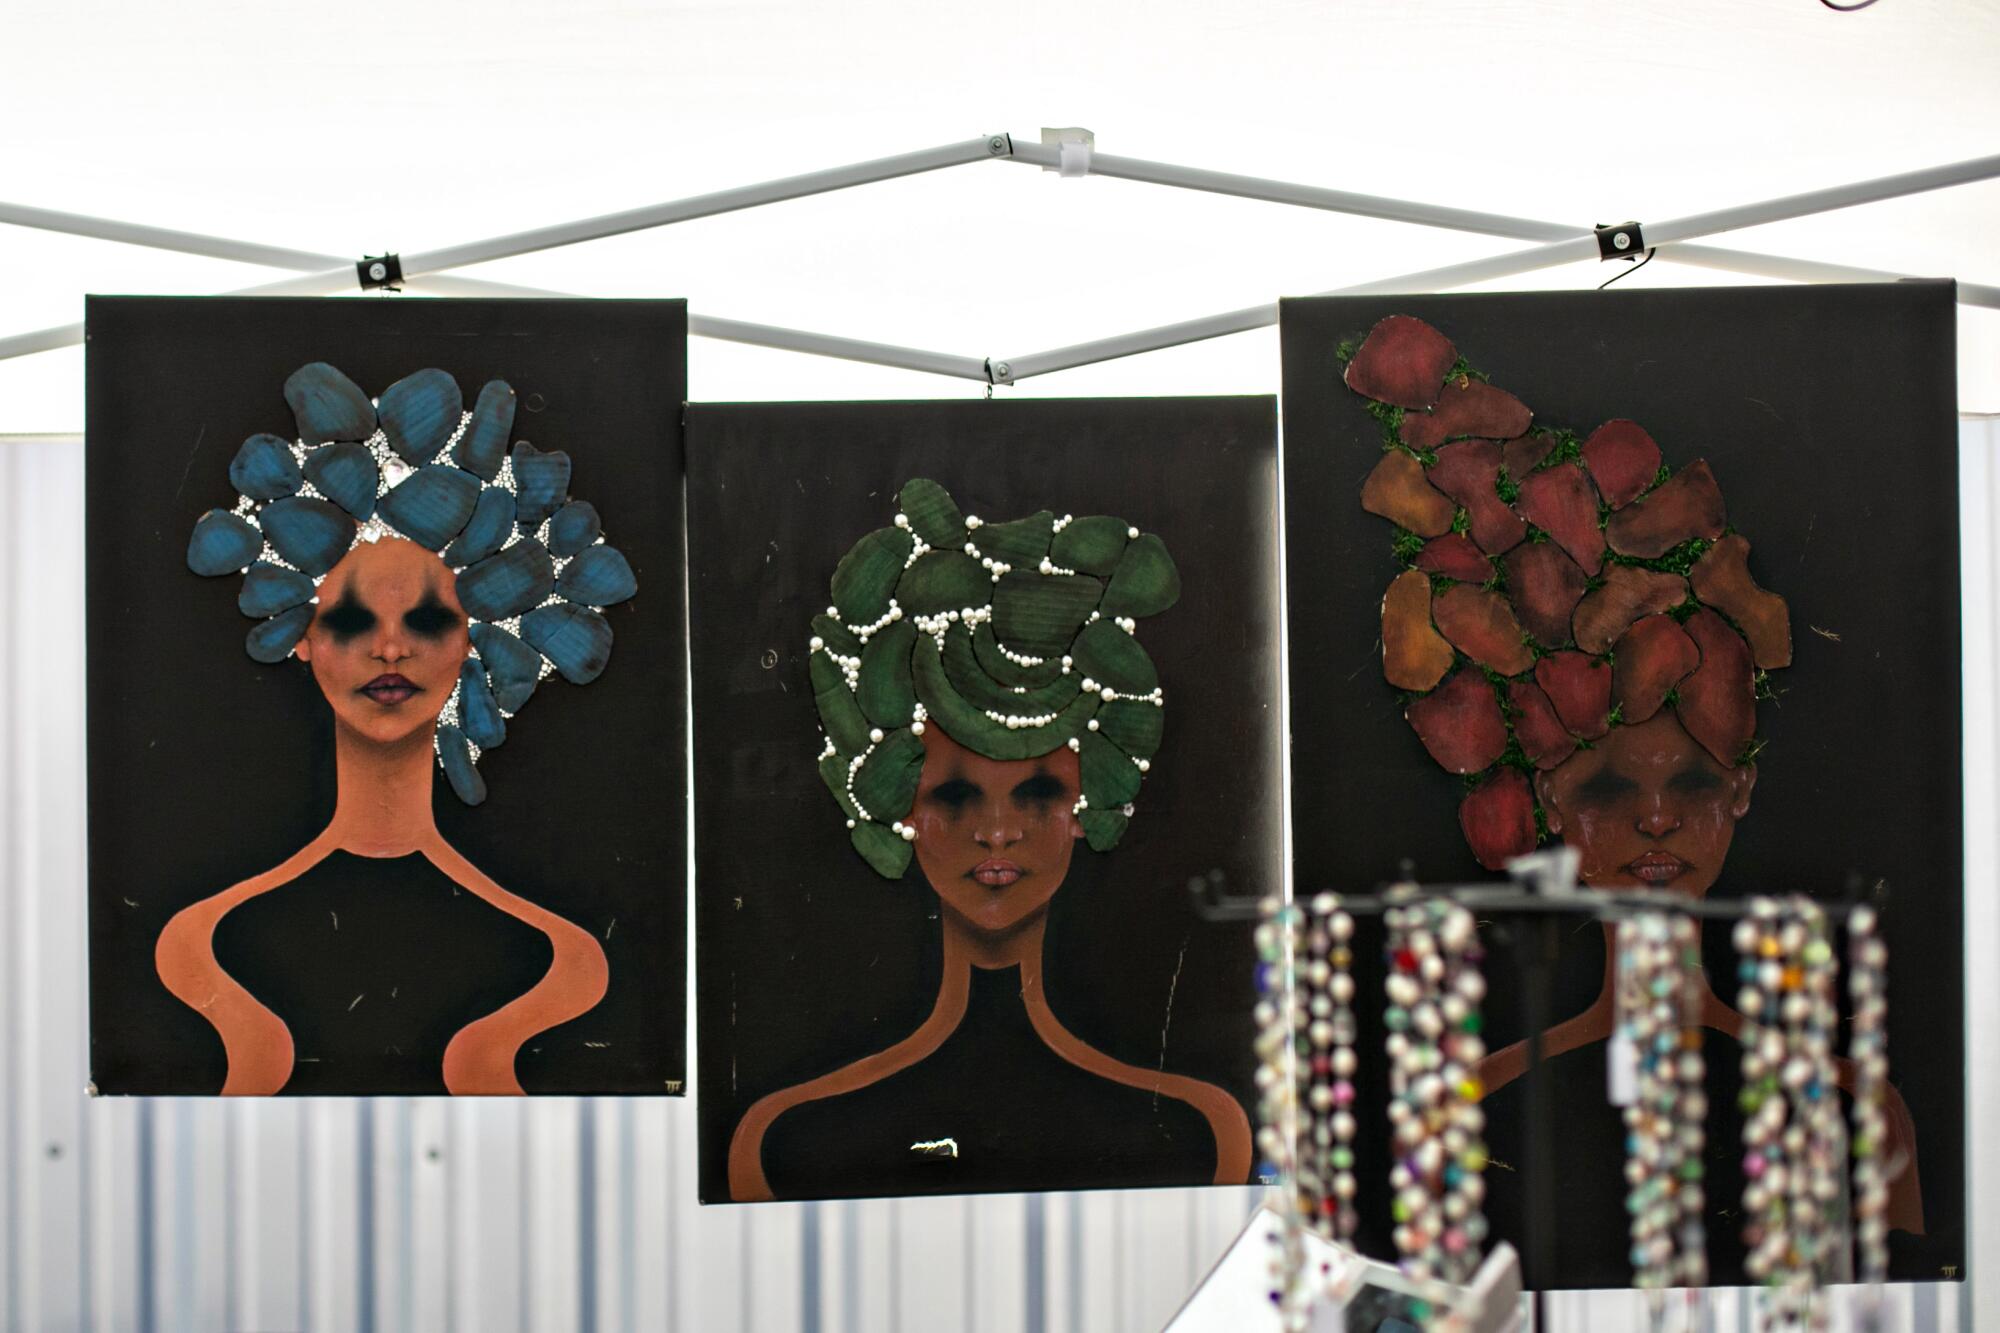 Colorful artworks on display at a Black Market Flea booth